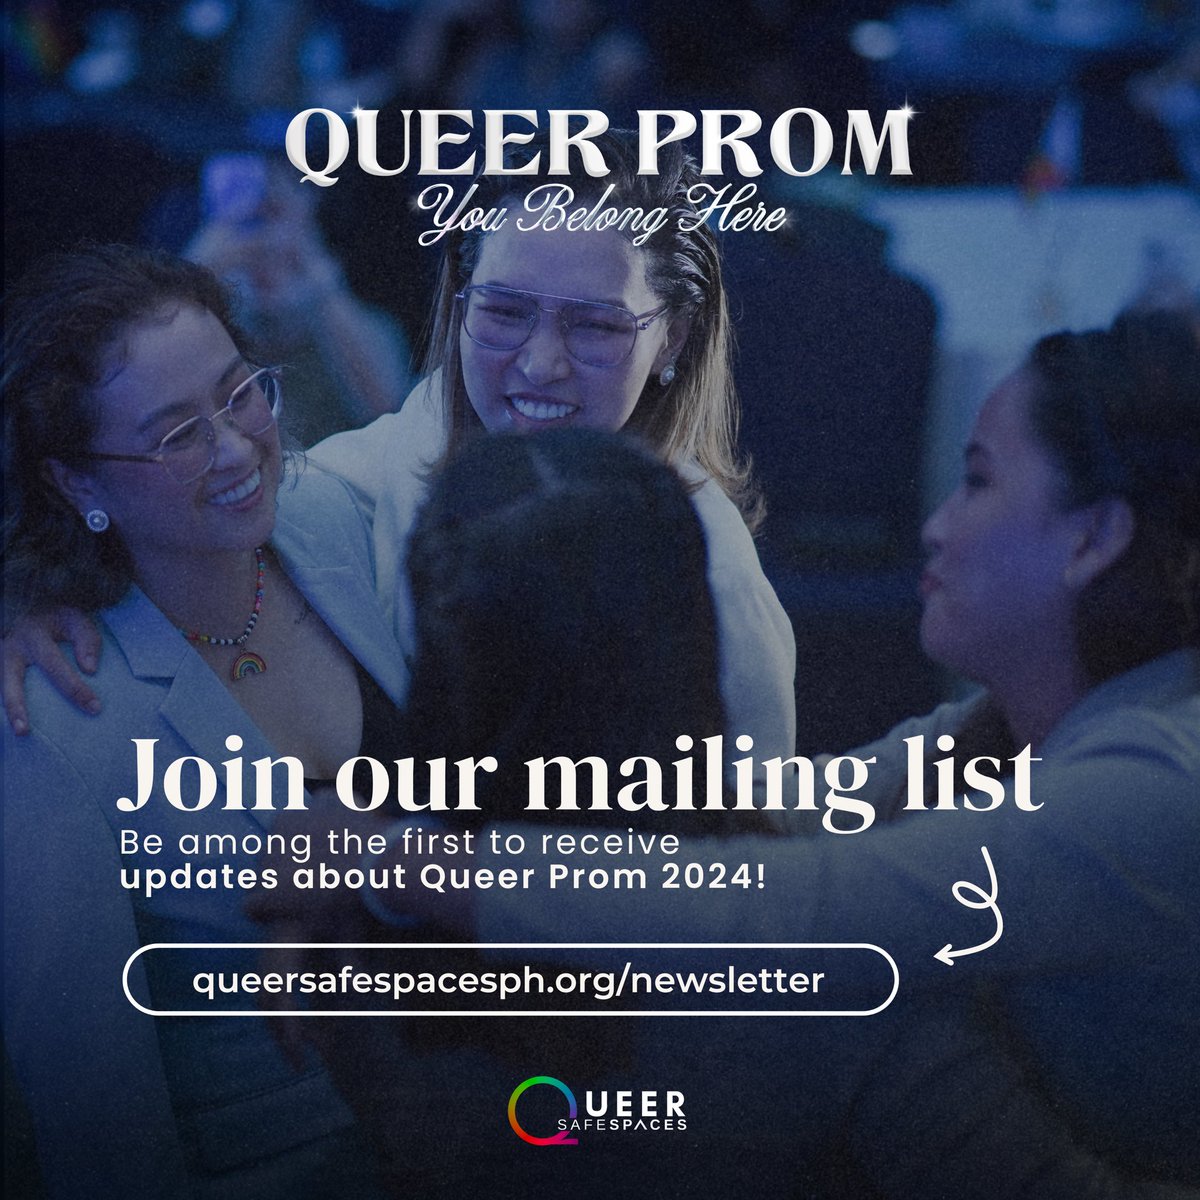 SUBSCRIBE TO OUR NEWSLETTER! 🍵 Be among the first to receive updates about Queer Prom 2024! 🏳️‍🌈 SUBSCRIBE HERE: queersafespacesph.org/newsletter #QueerPromPH #QueerSafeSpaces #ForYourPride